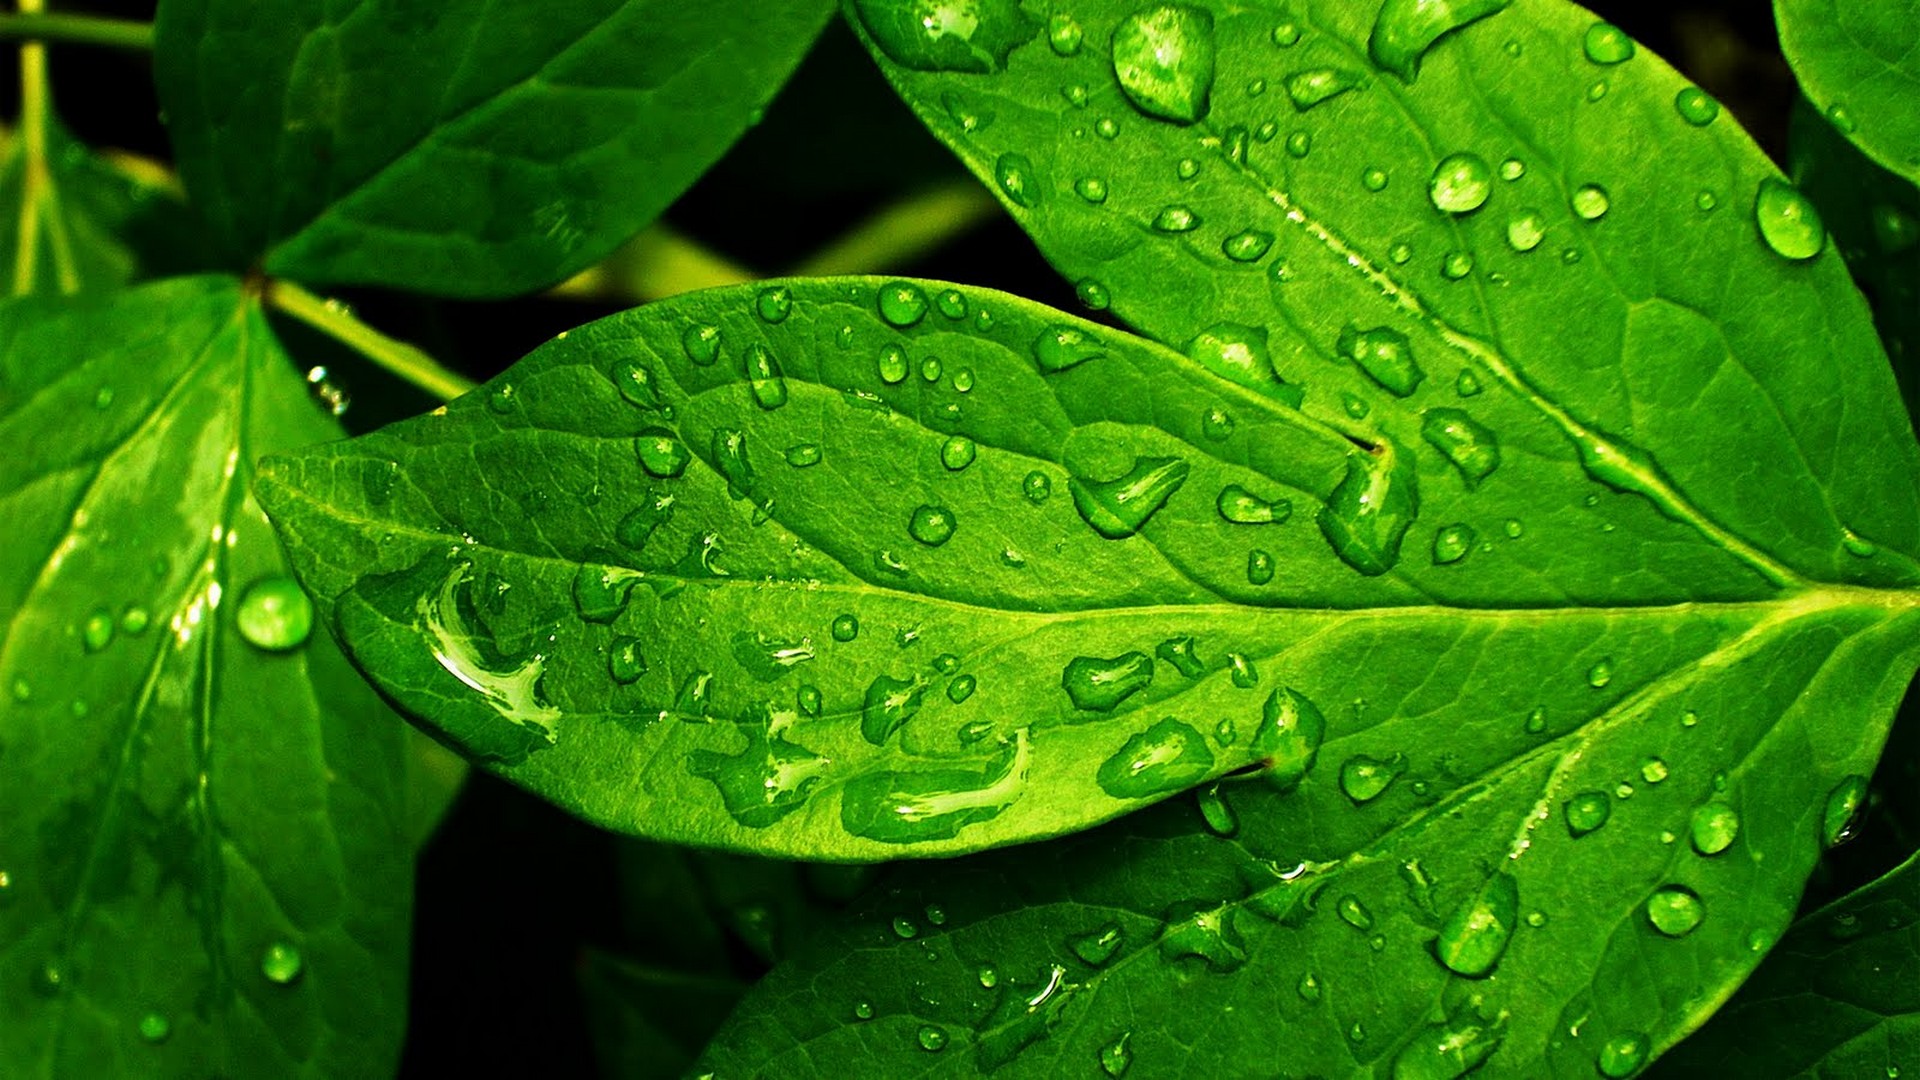 Green Leaf Background Wallpaper HD with image resolution 1920x1080 pixel. You can make this wallpaper for your Desktop Computer Backgrounds, Mac Wallpapers, Android Lock screen or iPhone Screensavers